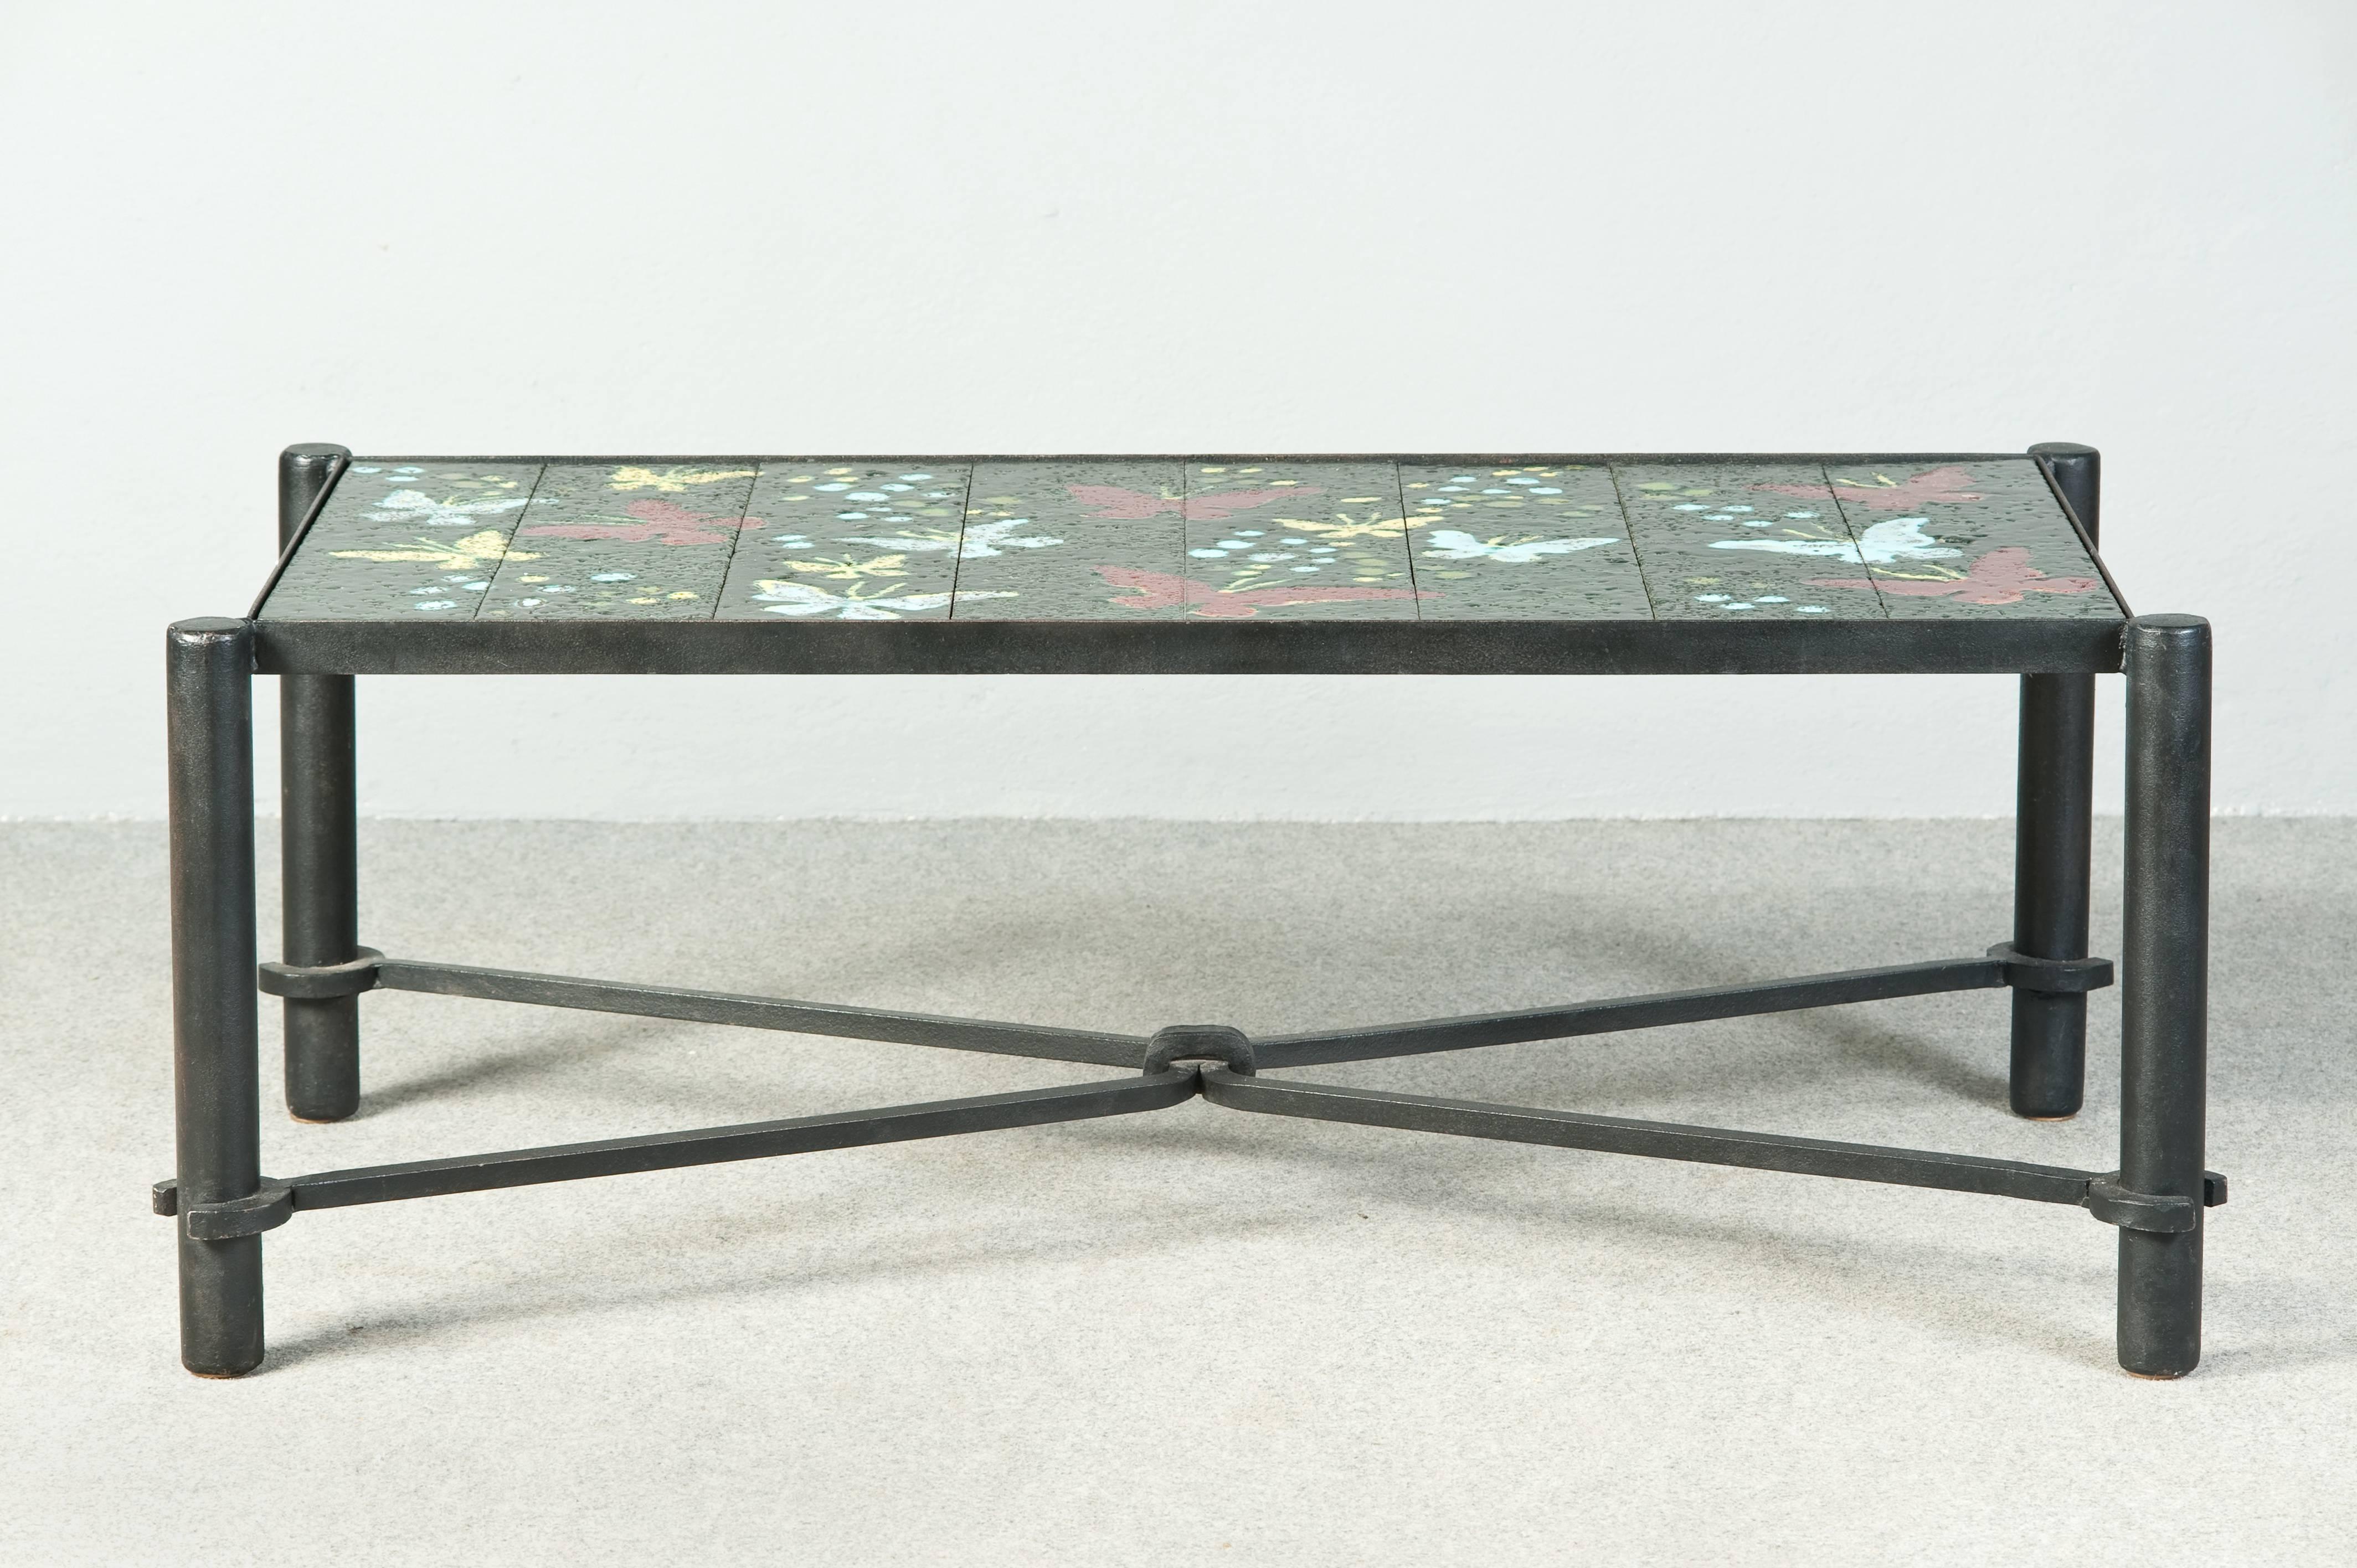 Famous glazed lava stones butterflies coffee table. iron base. Published in Jacques Adnet by Alain-Renè Hardy, Gaelle Millet.